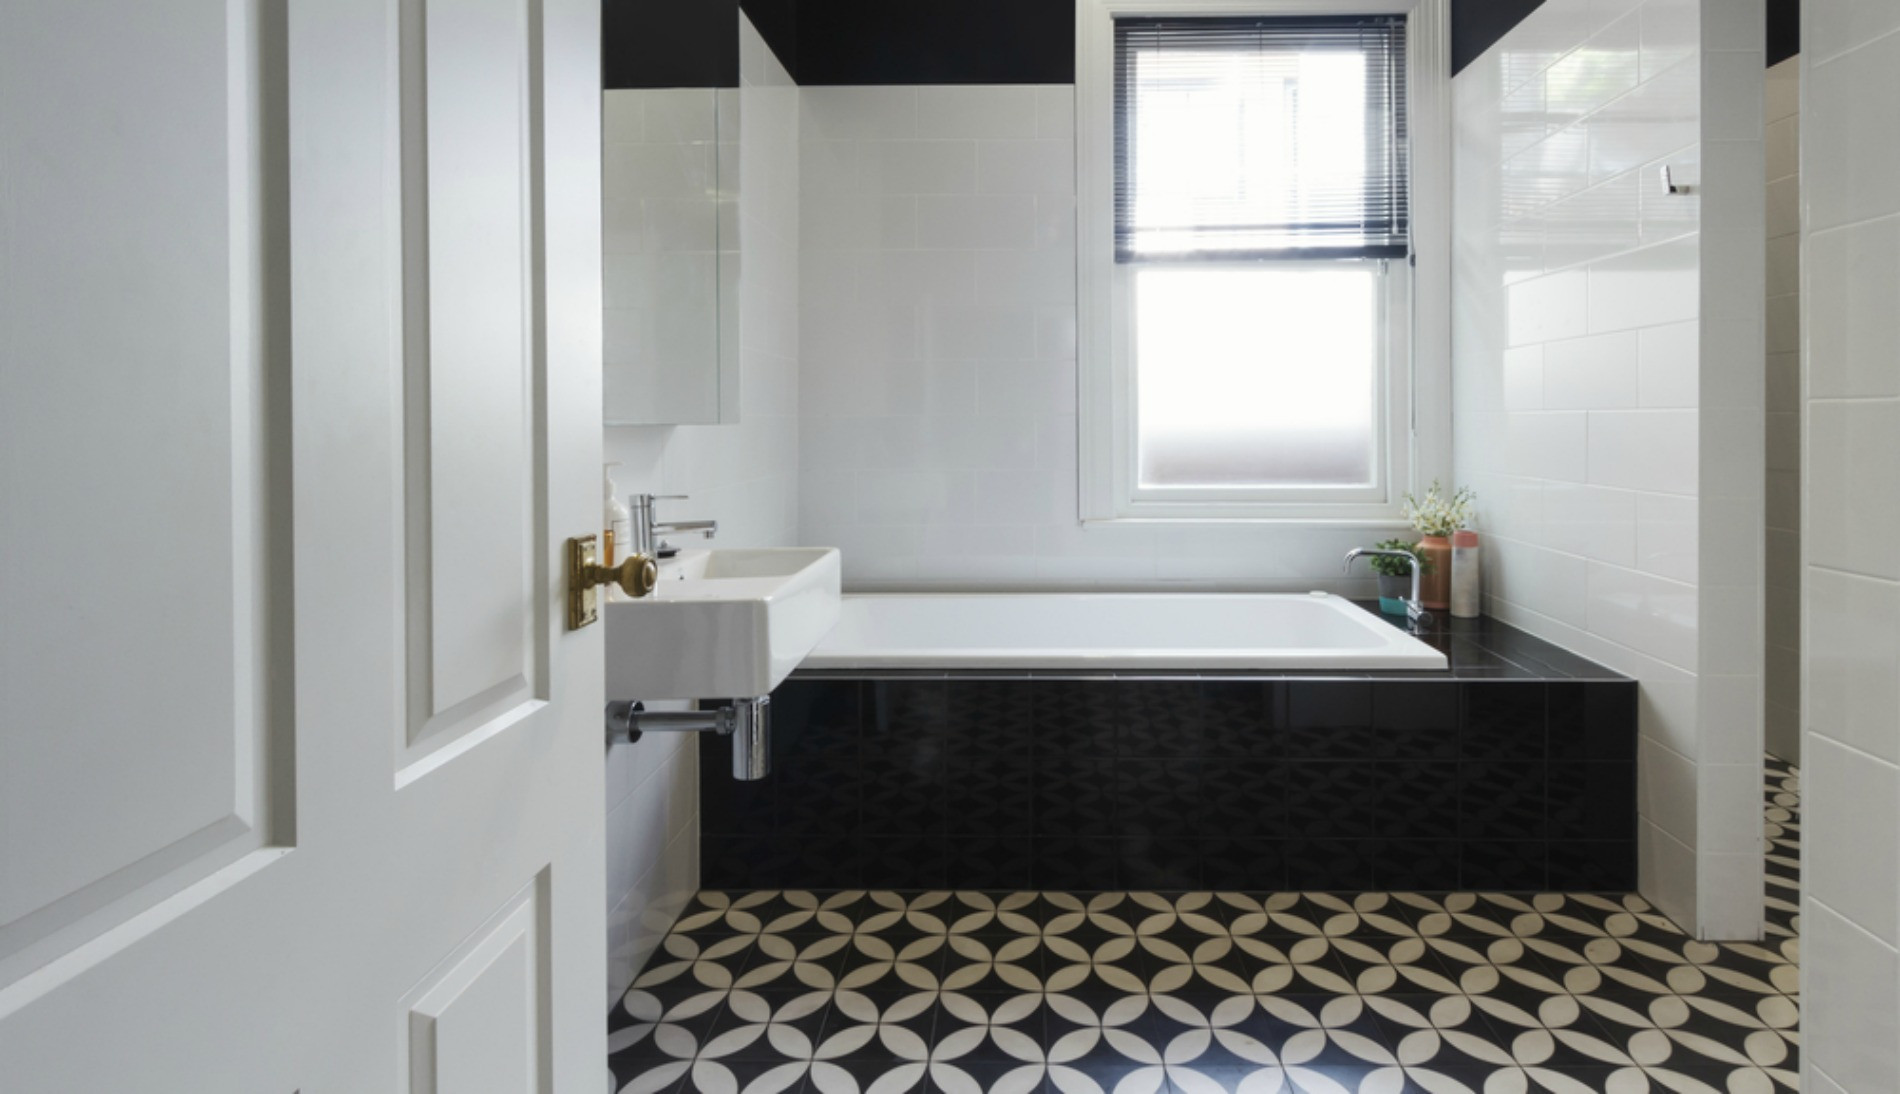 Black Bathroom Tile
 Bathrooms with Black and White Patterned Floor Tiles